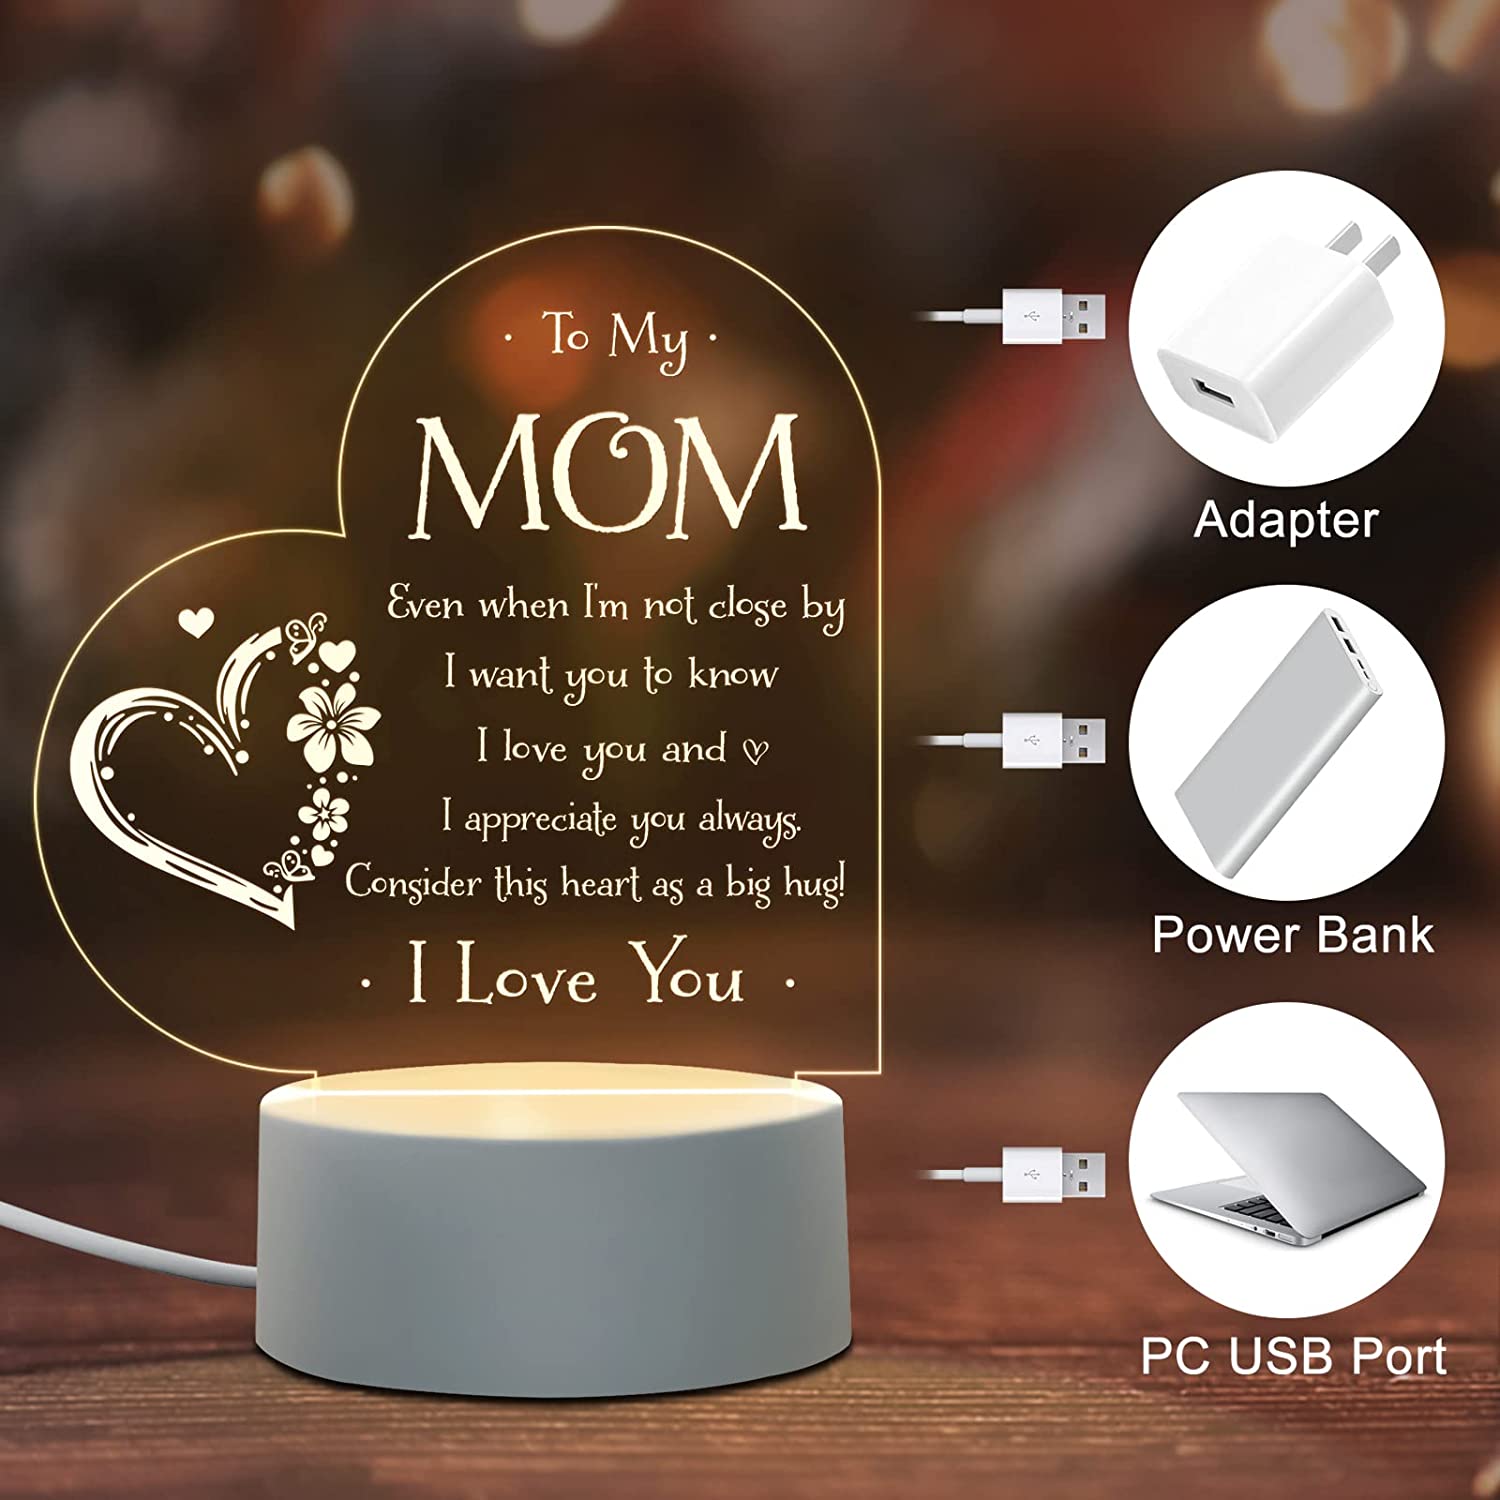 Christmas Gifts for Mom from Daughter Son- Mom Birthday Gifts Night Light